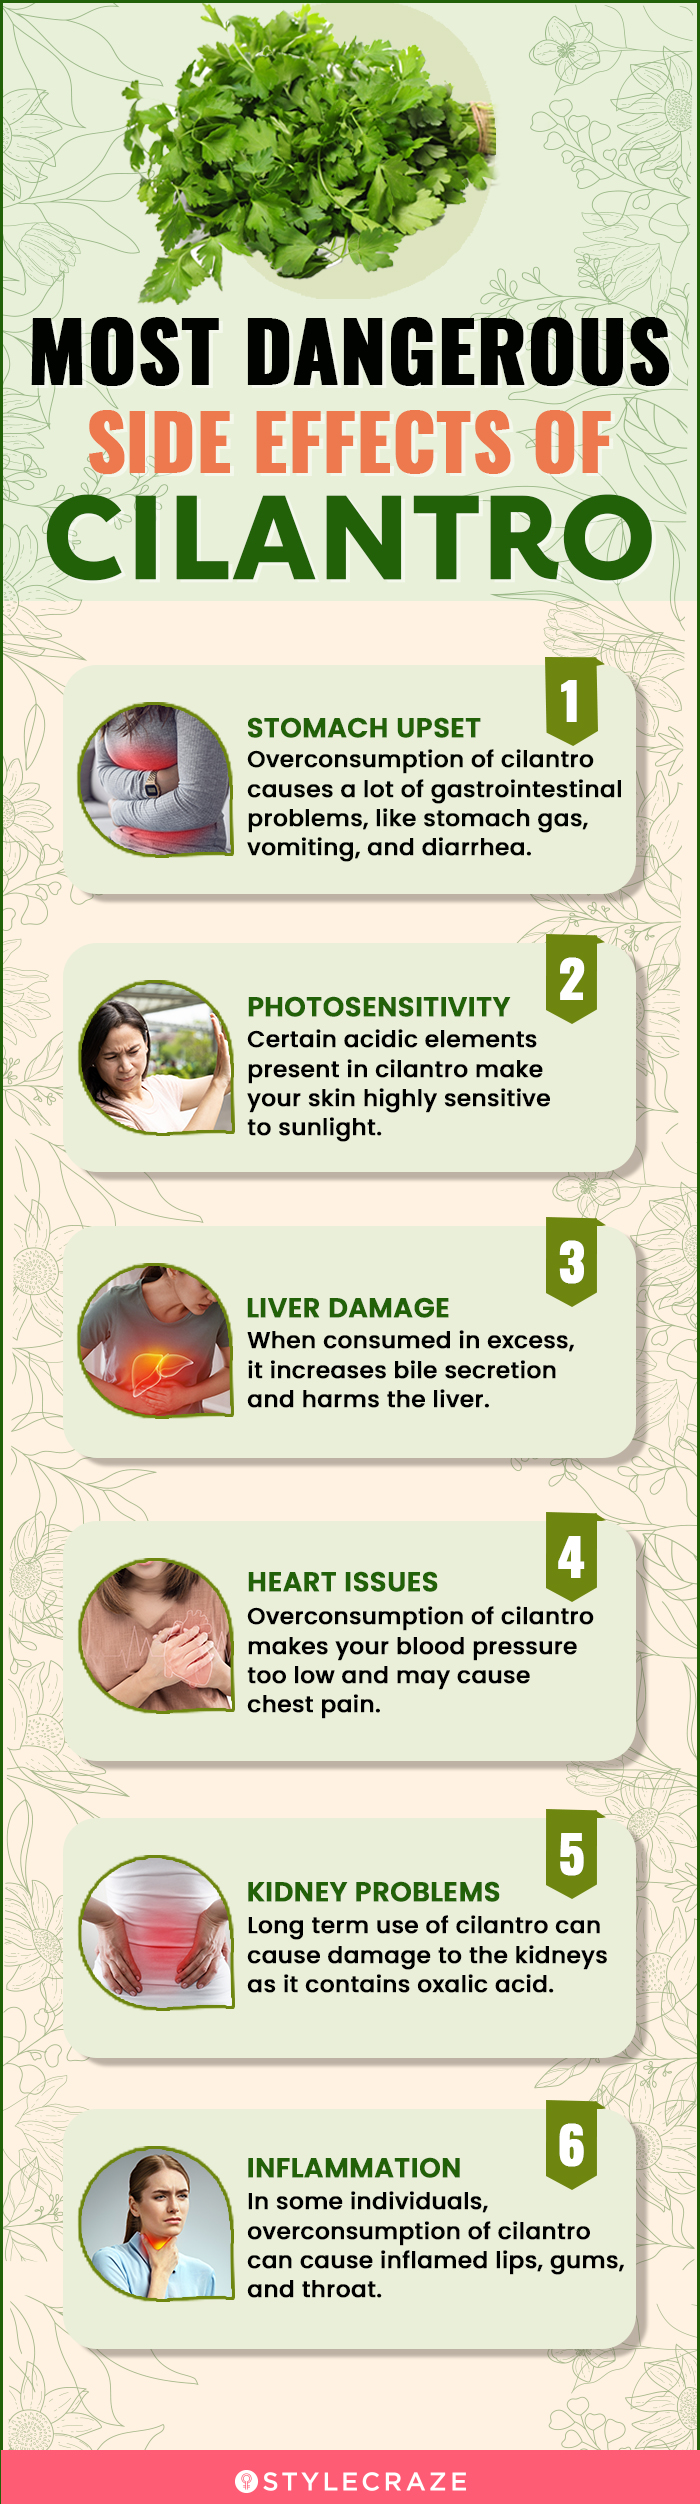 most dangerous side effects of cilantro (infographic)